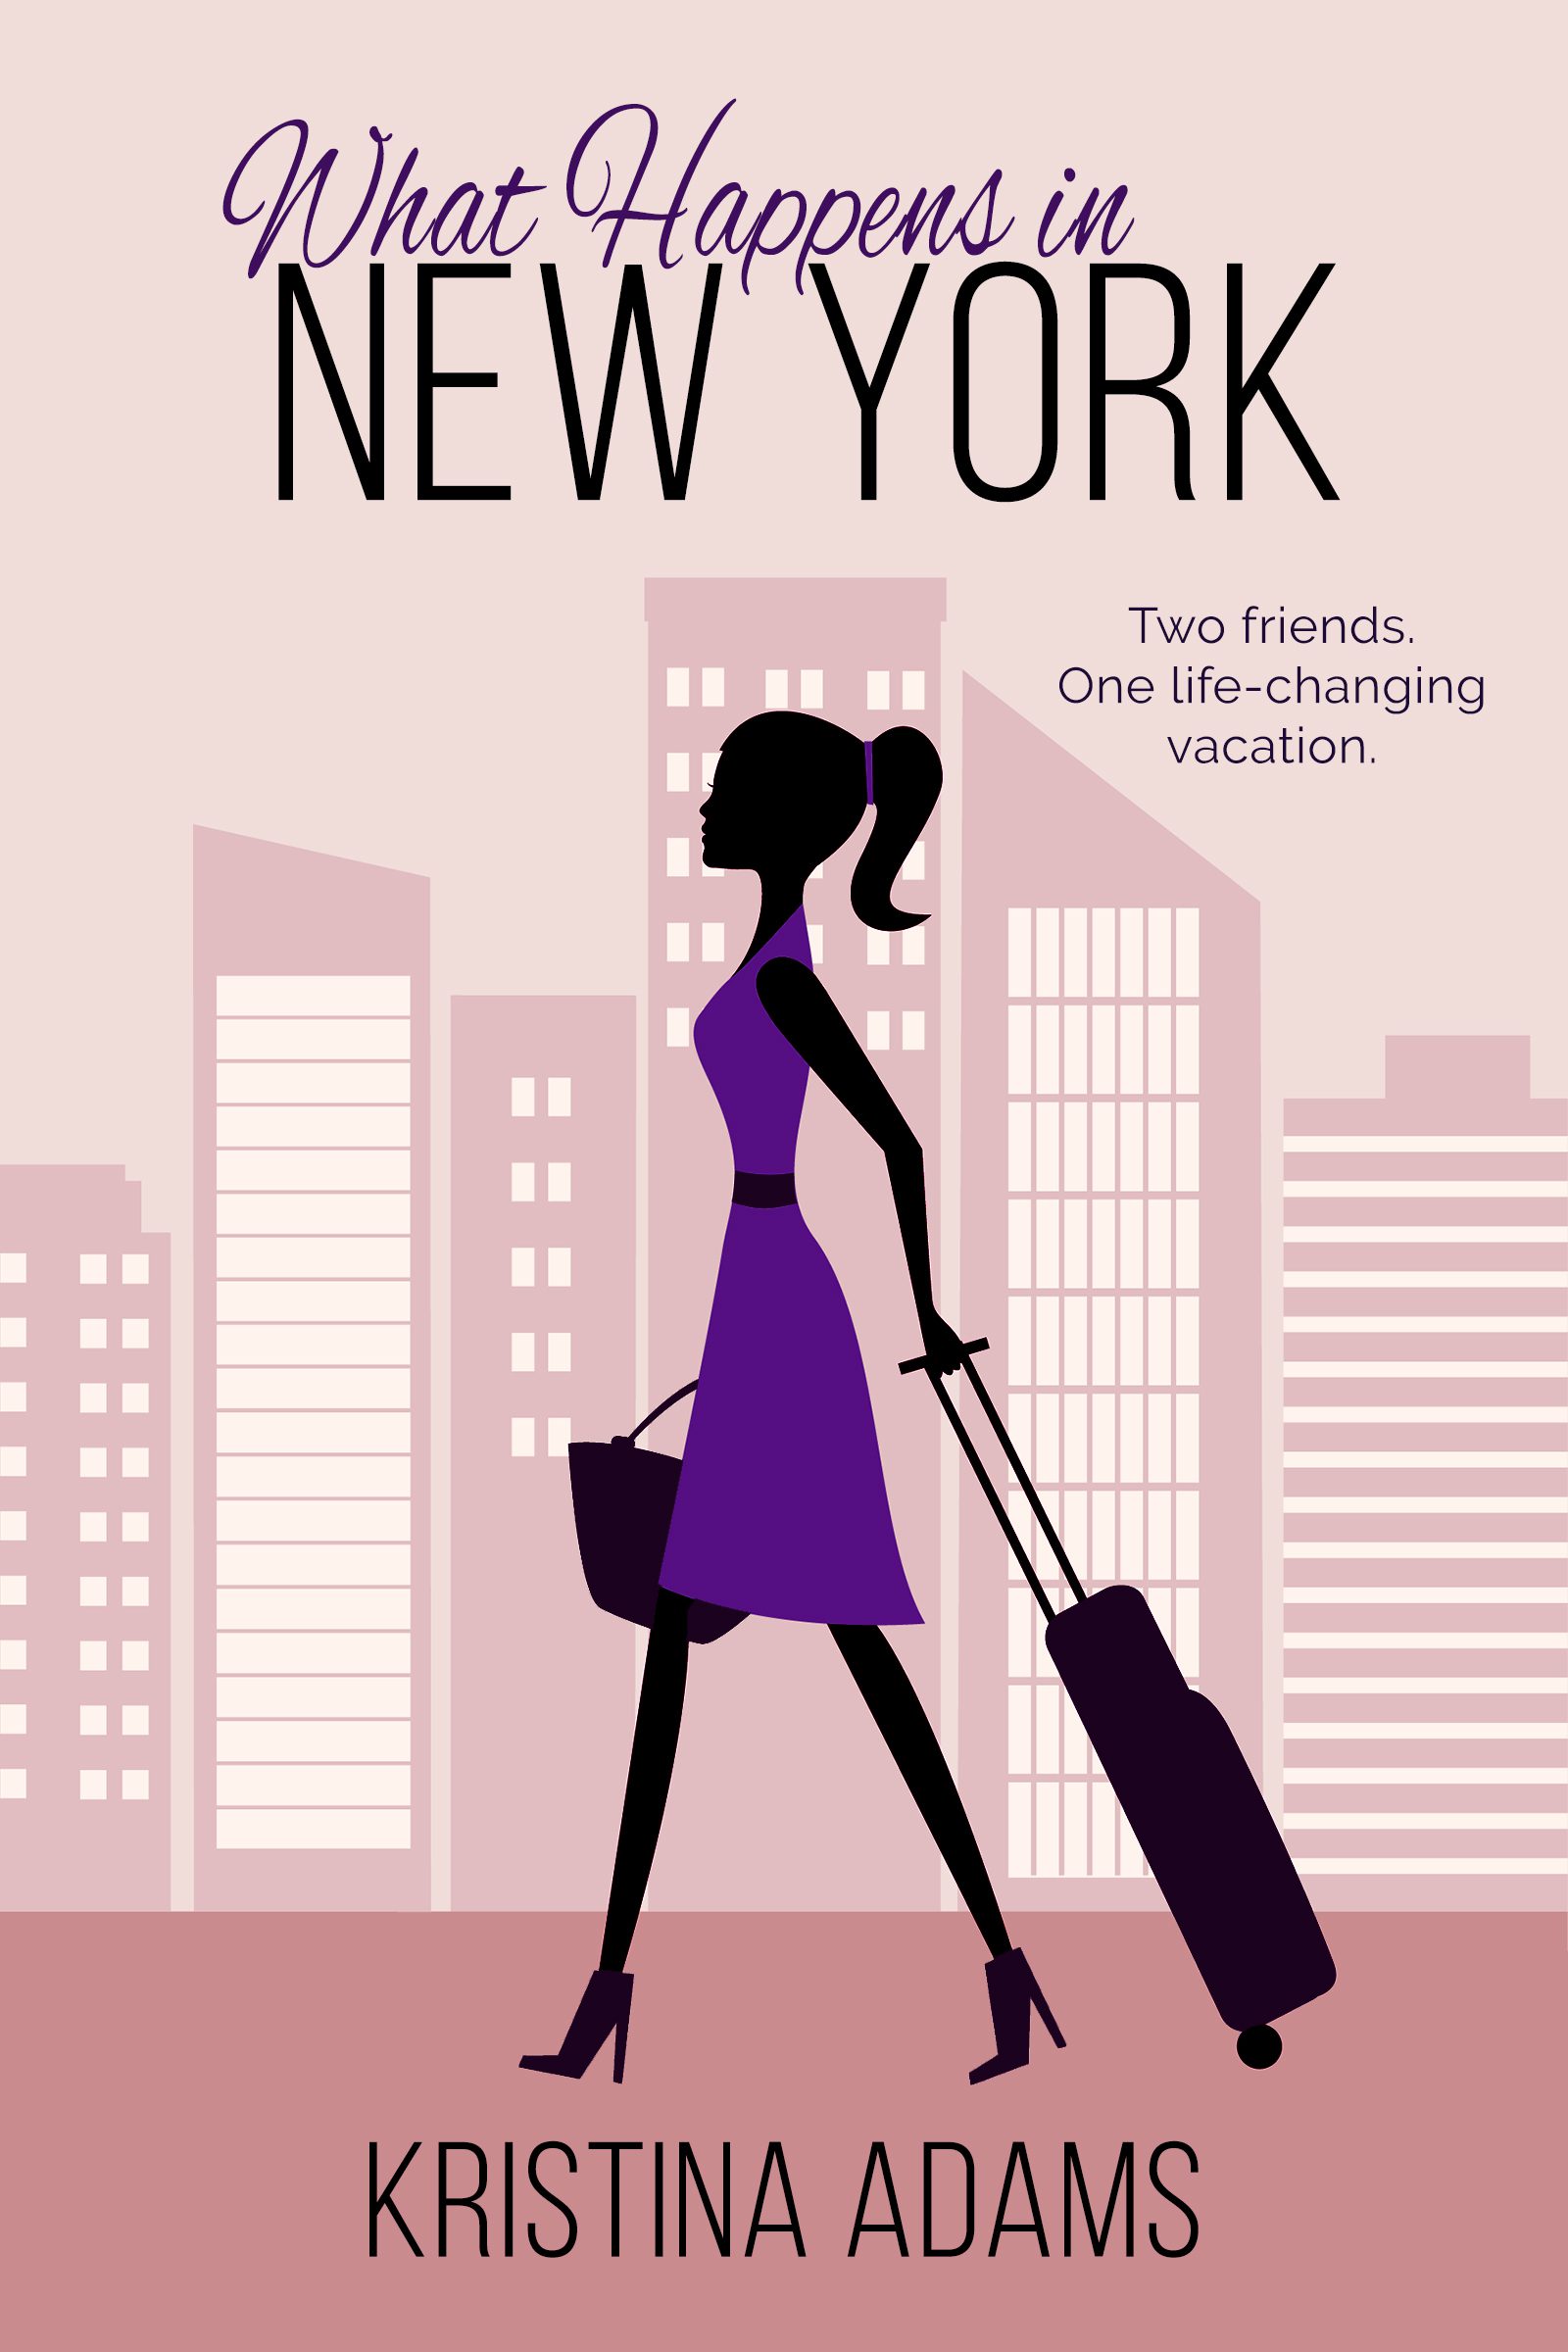 What Happens in New York, the first book in the What Happens in... series by Kristina Adams